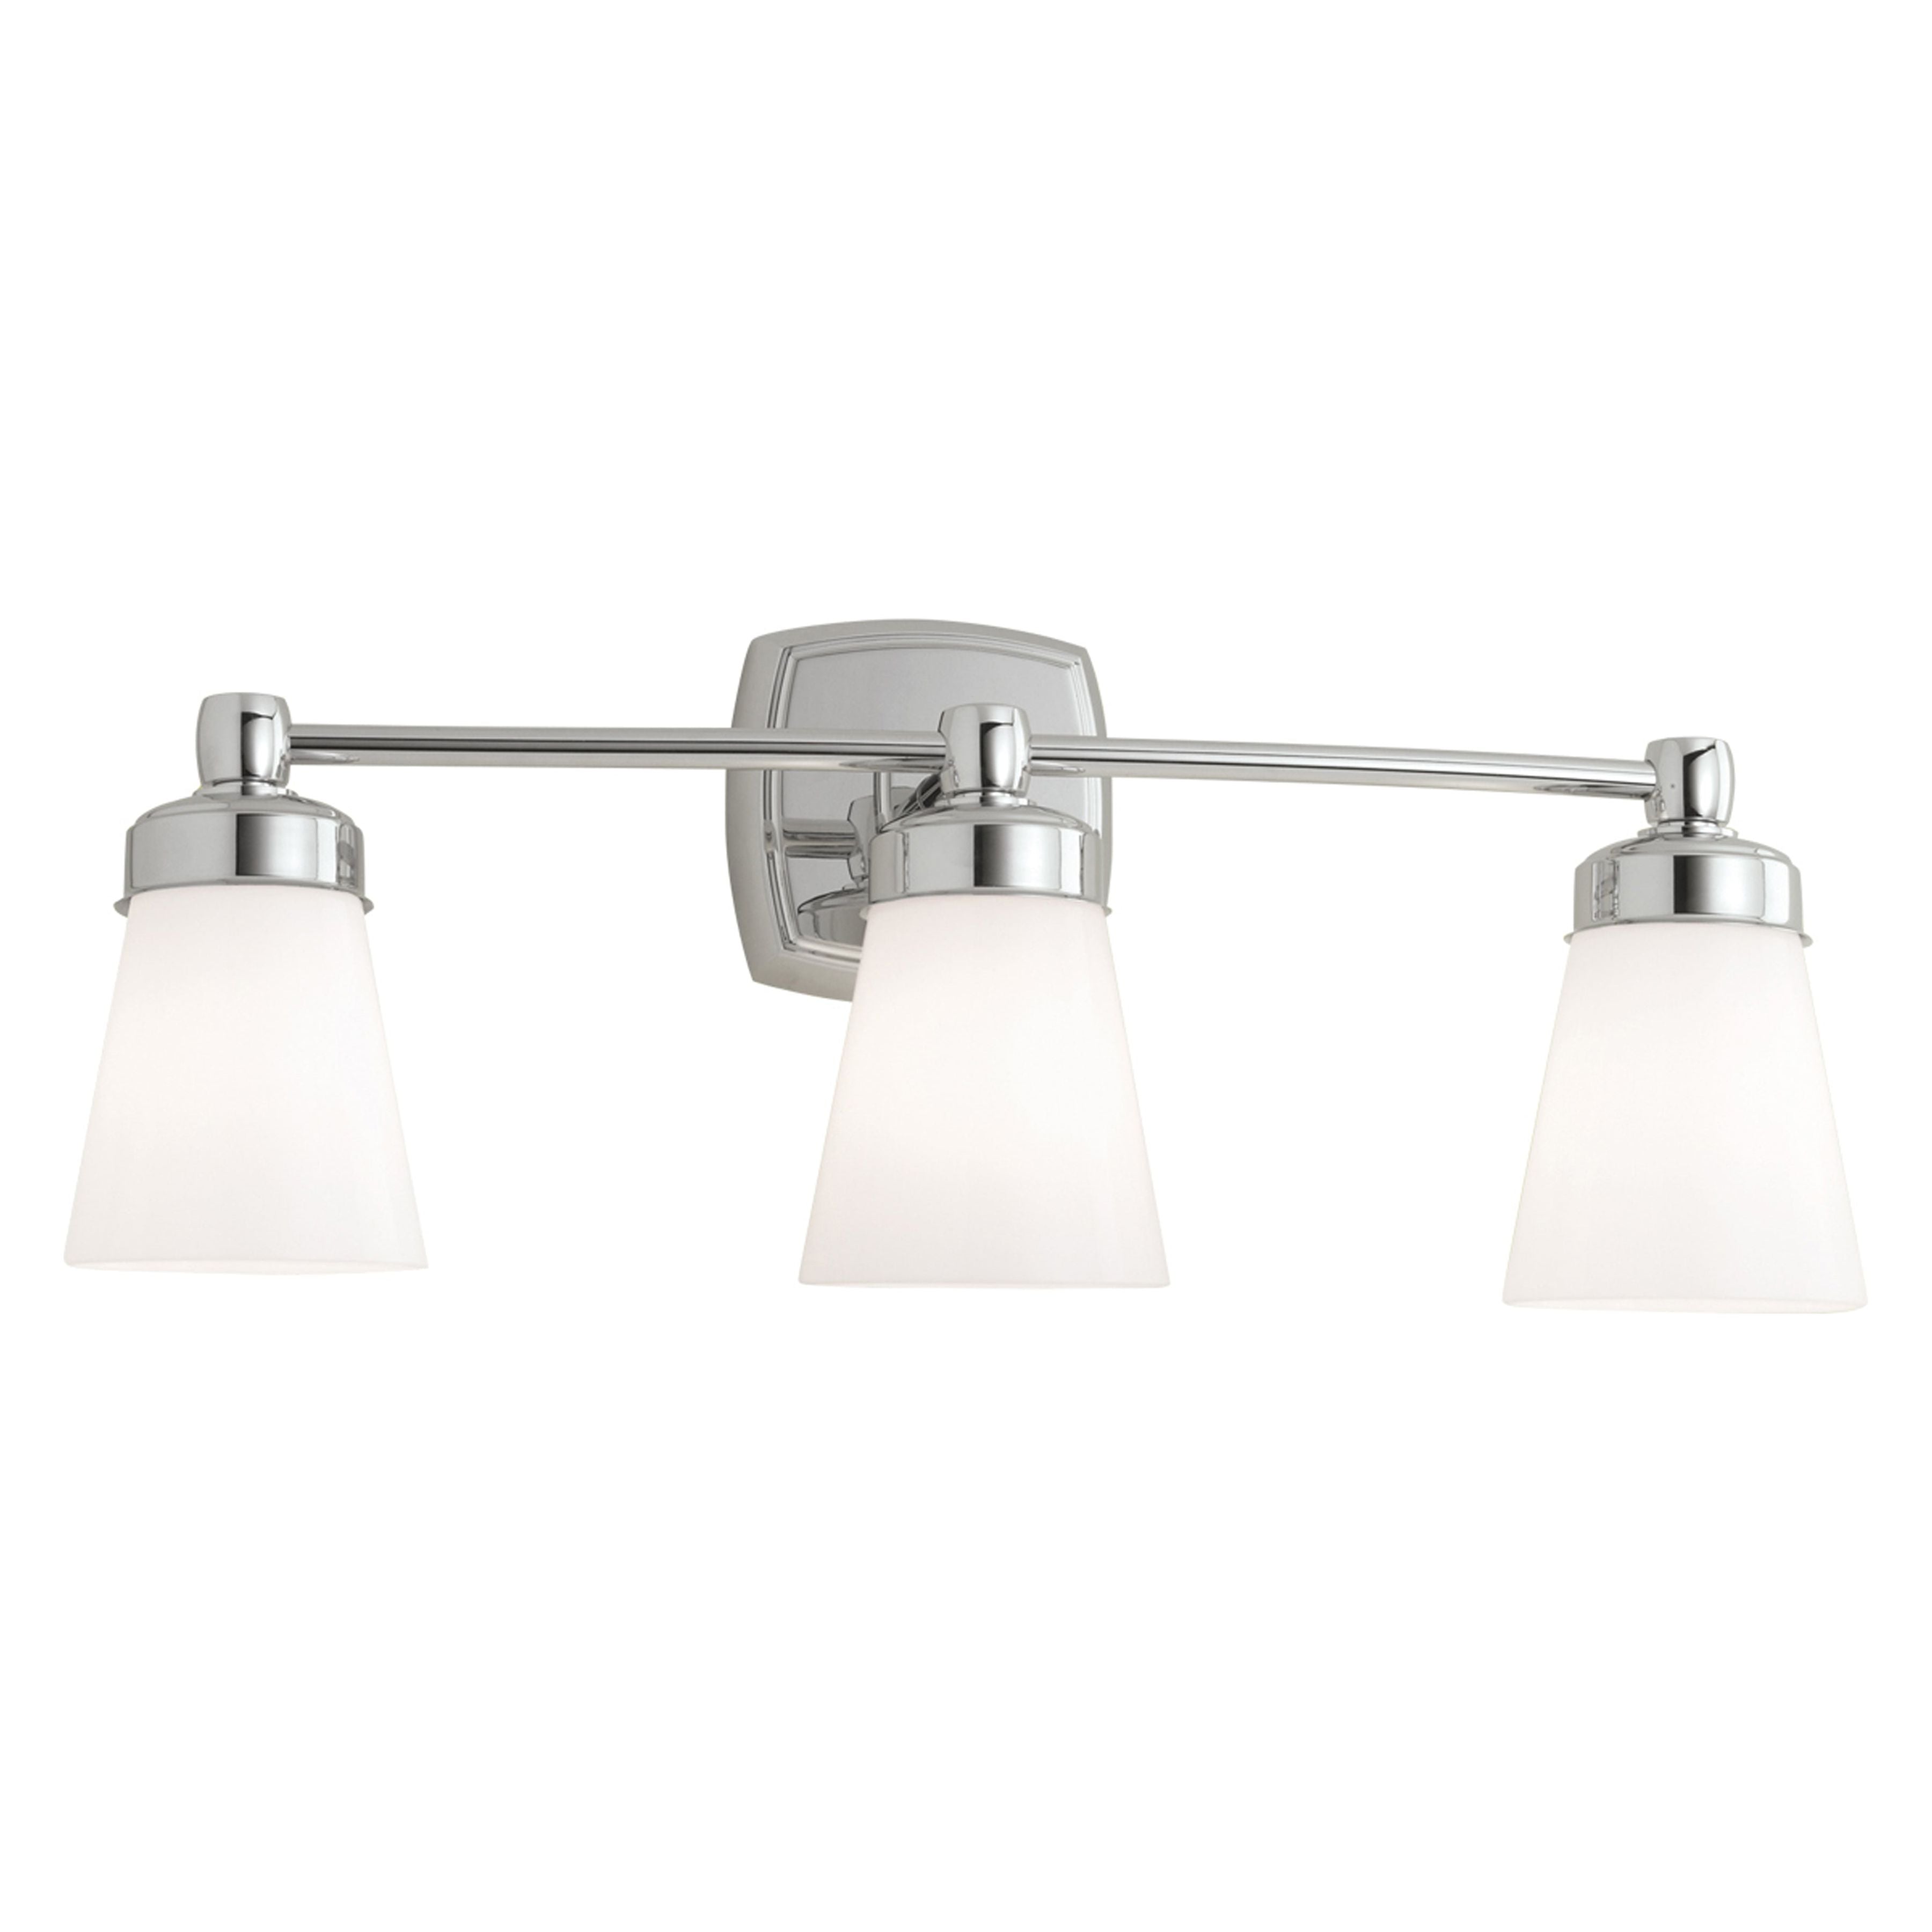 Soft Square 3-Light Wall Sconce